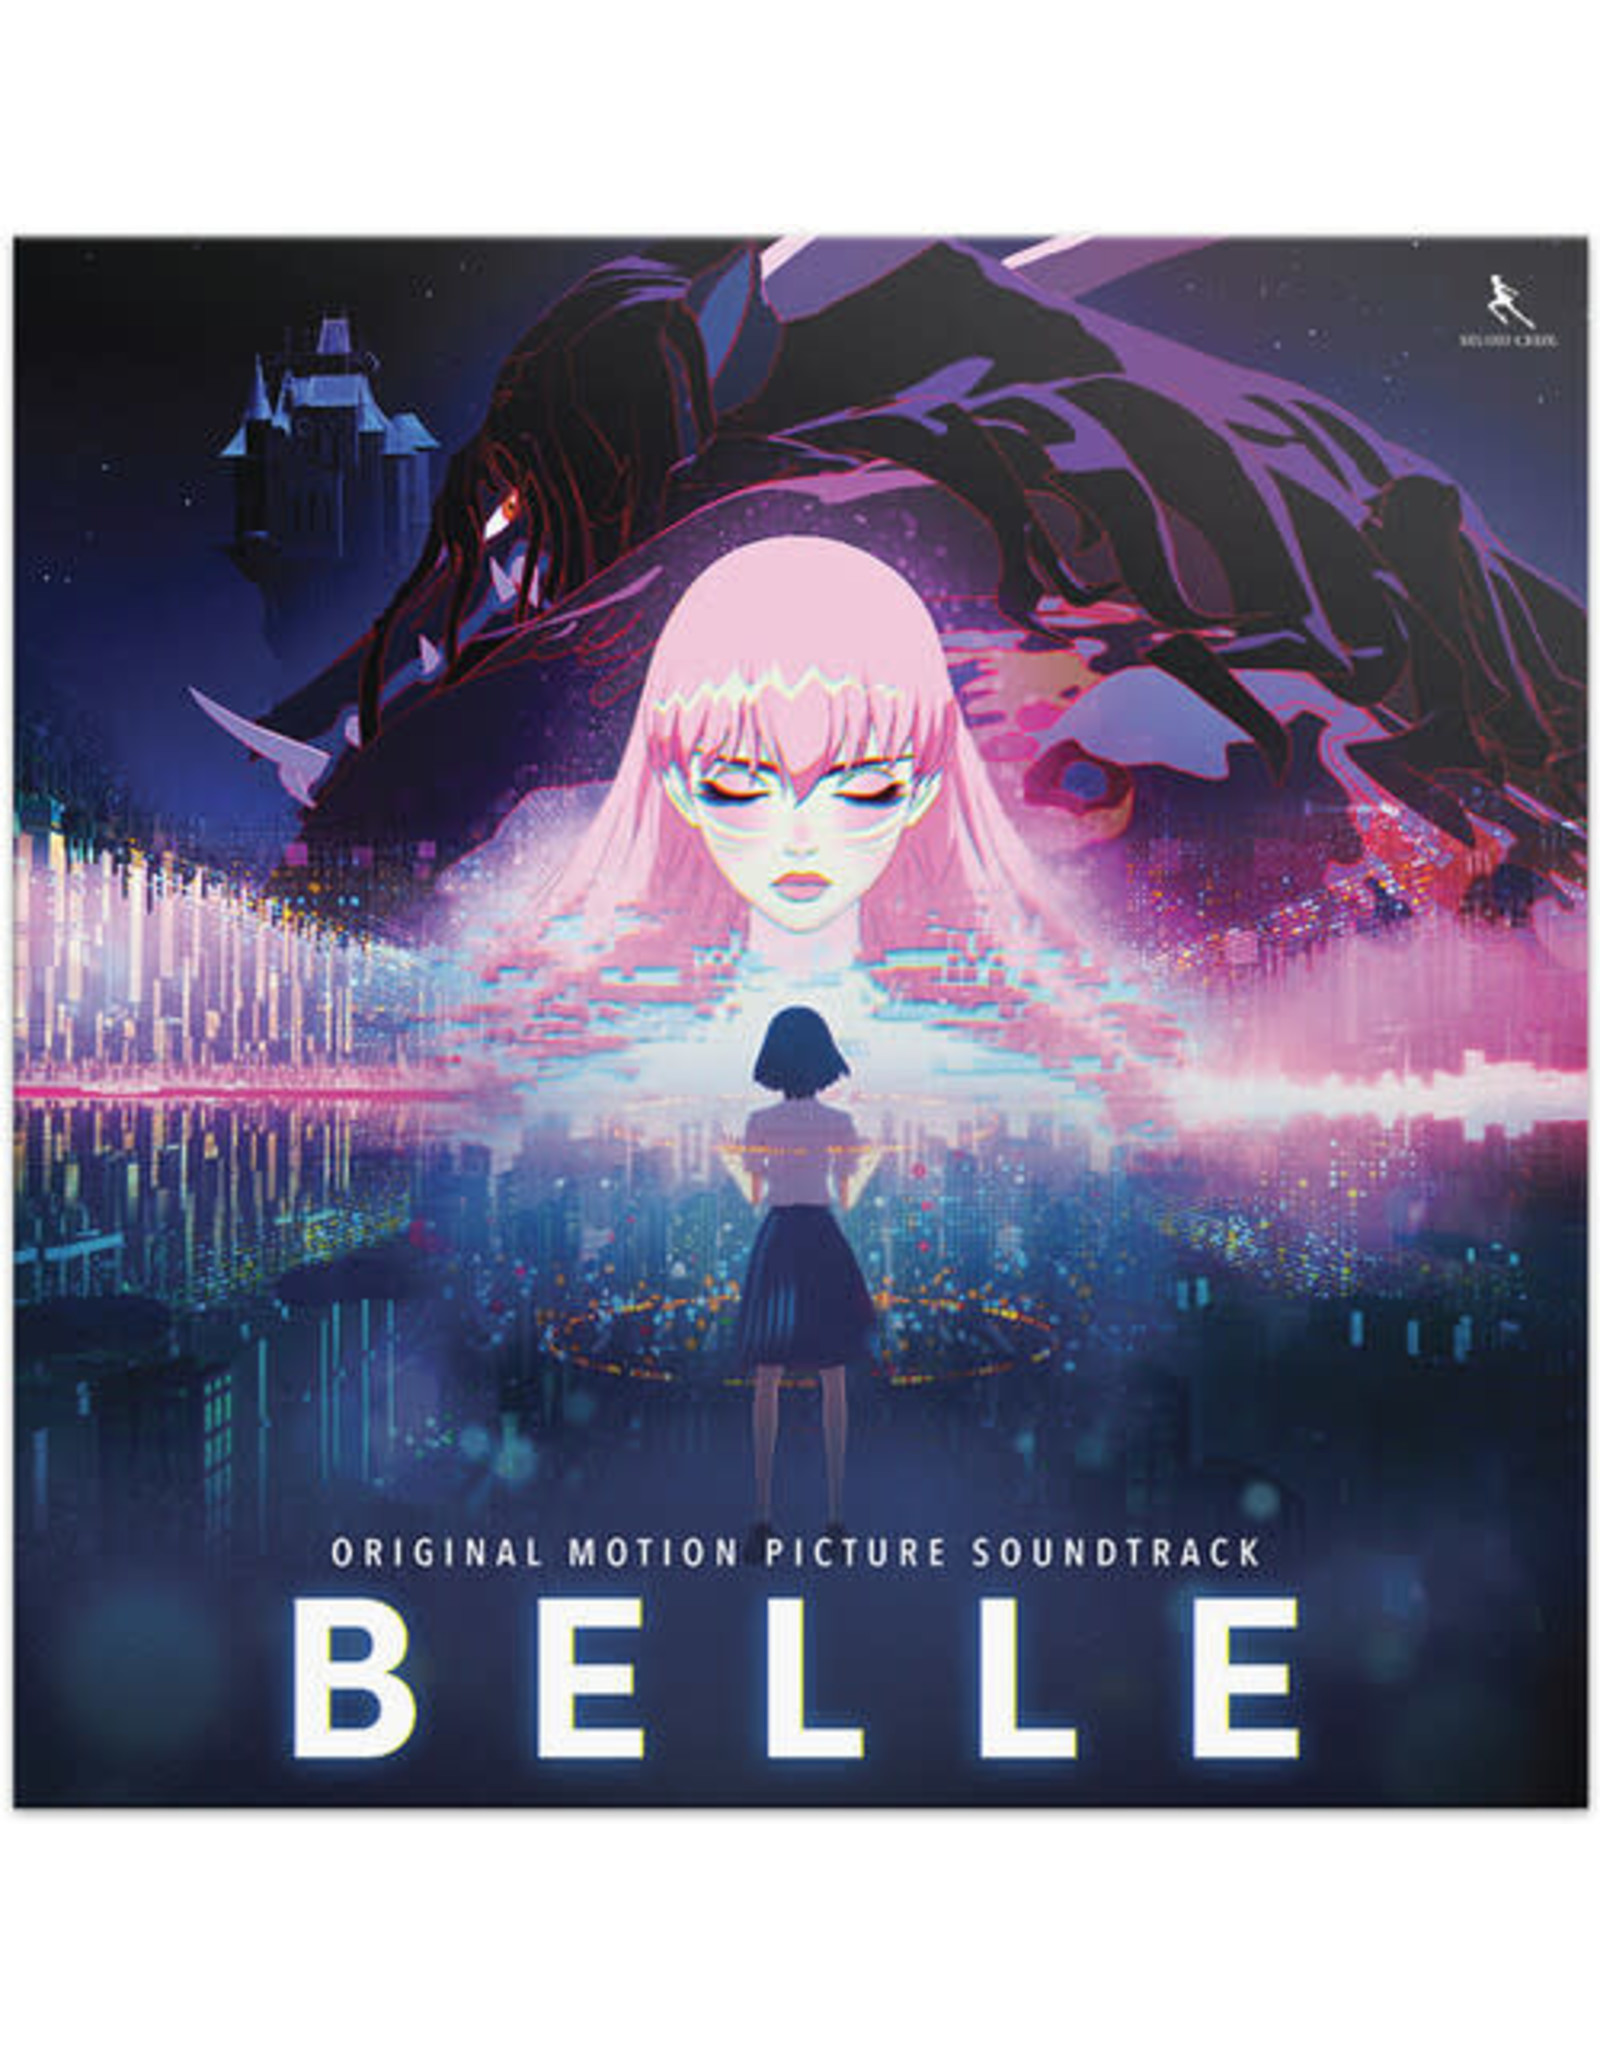 New Vinyl Ludvig Forssell and Taisei Iwasaki - Belle (Blue/Pink) OST 2LP